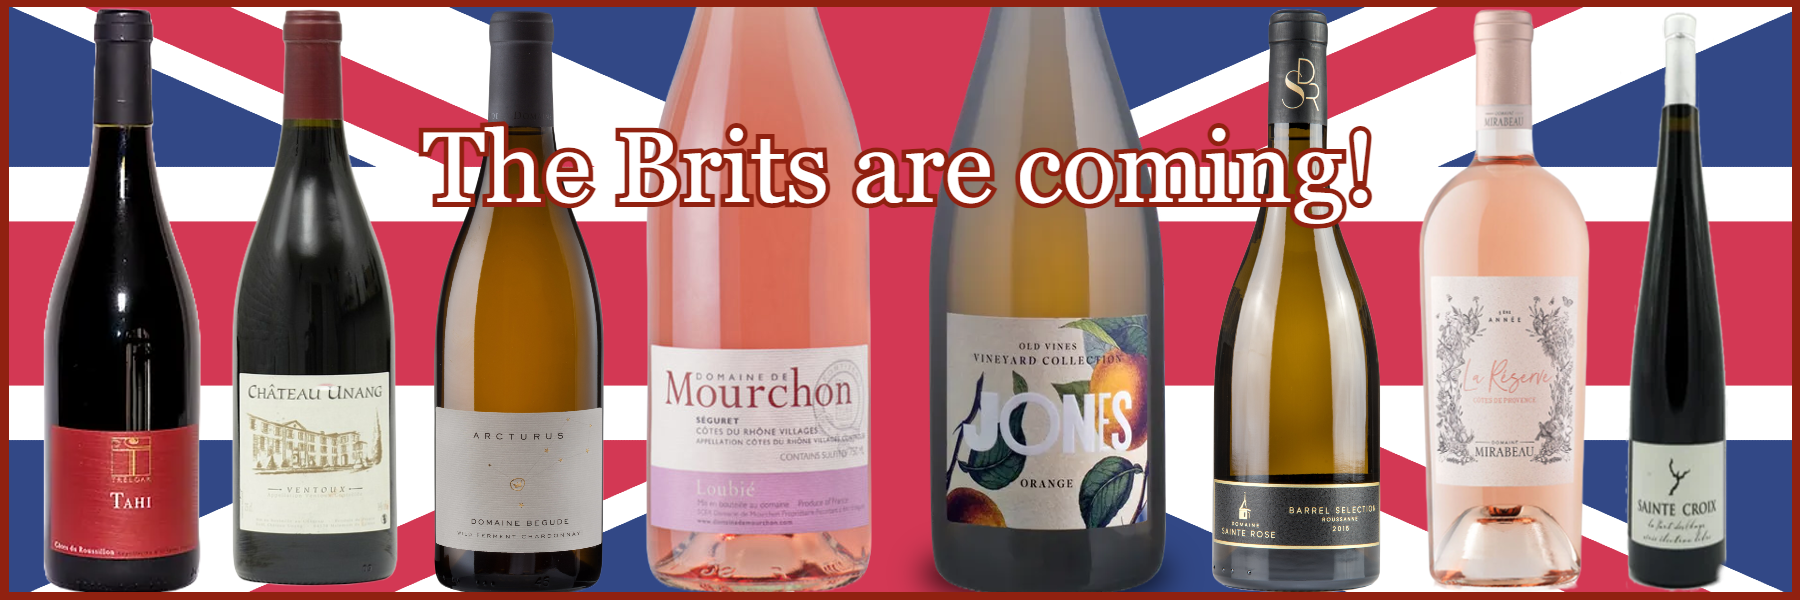 The Brits are coming!